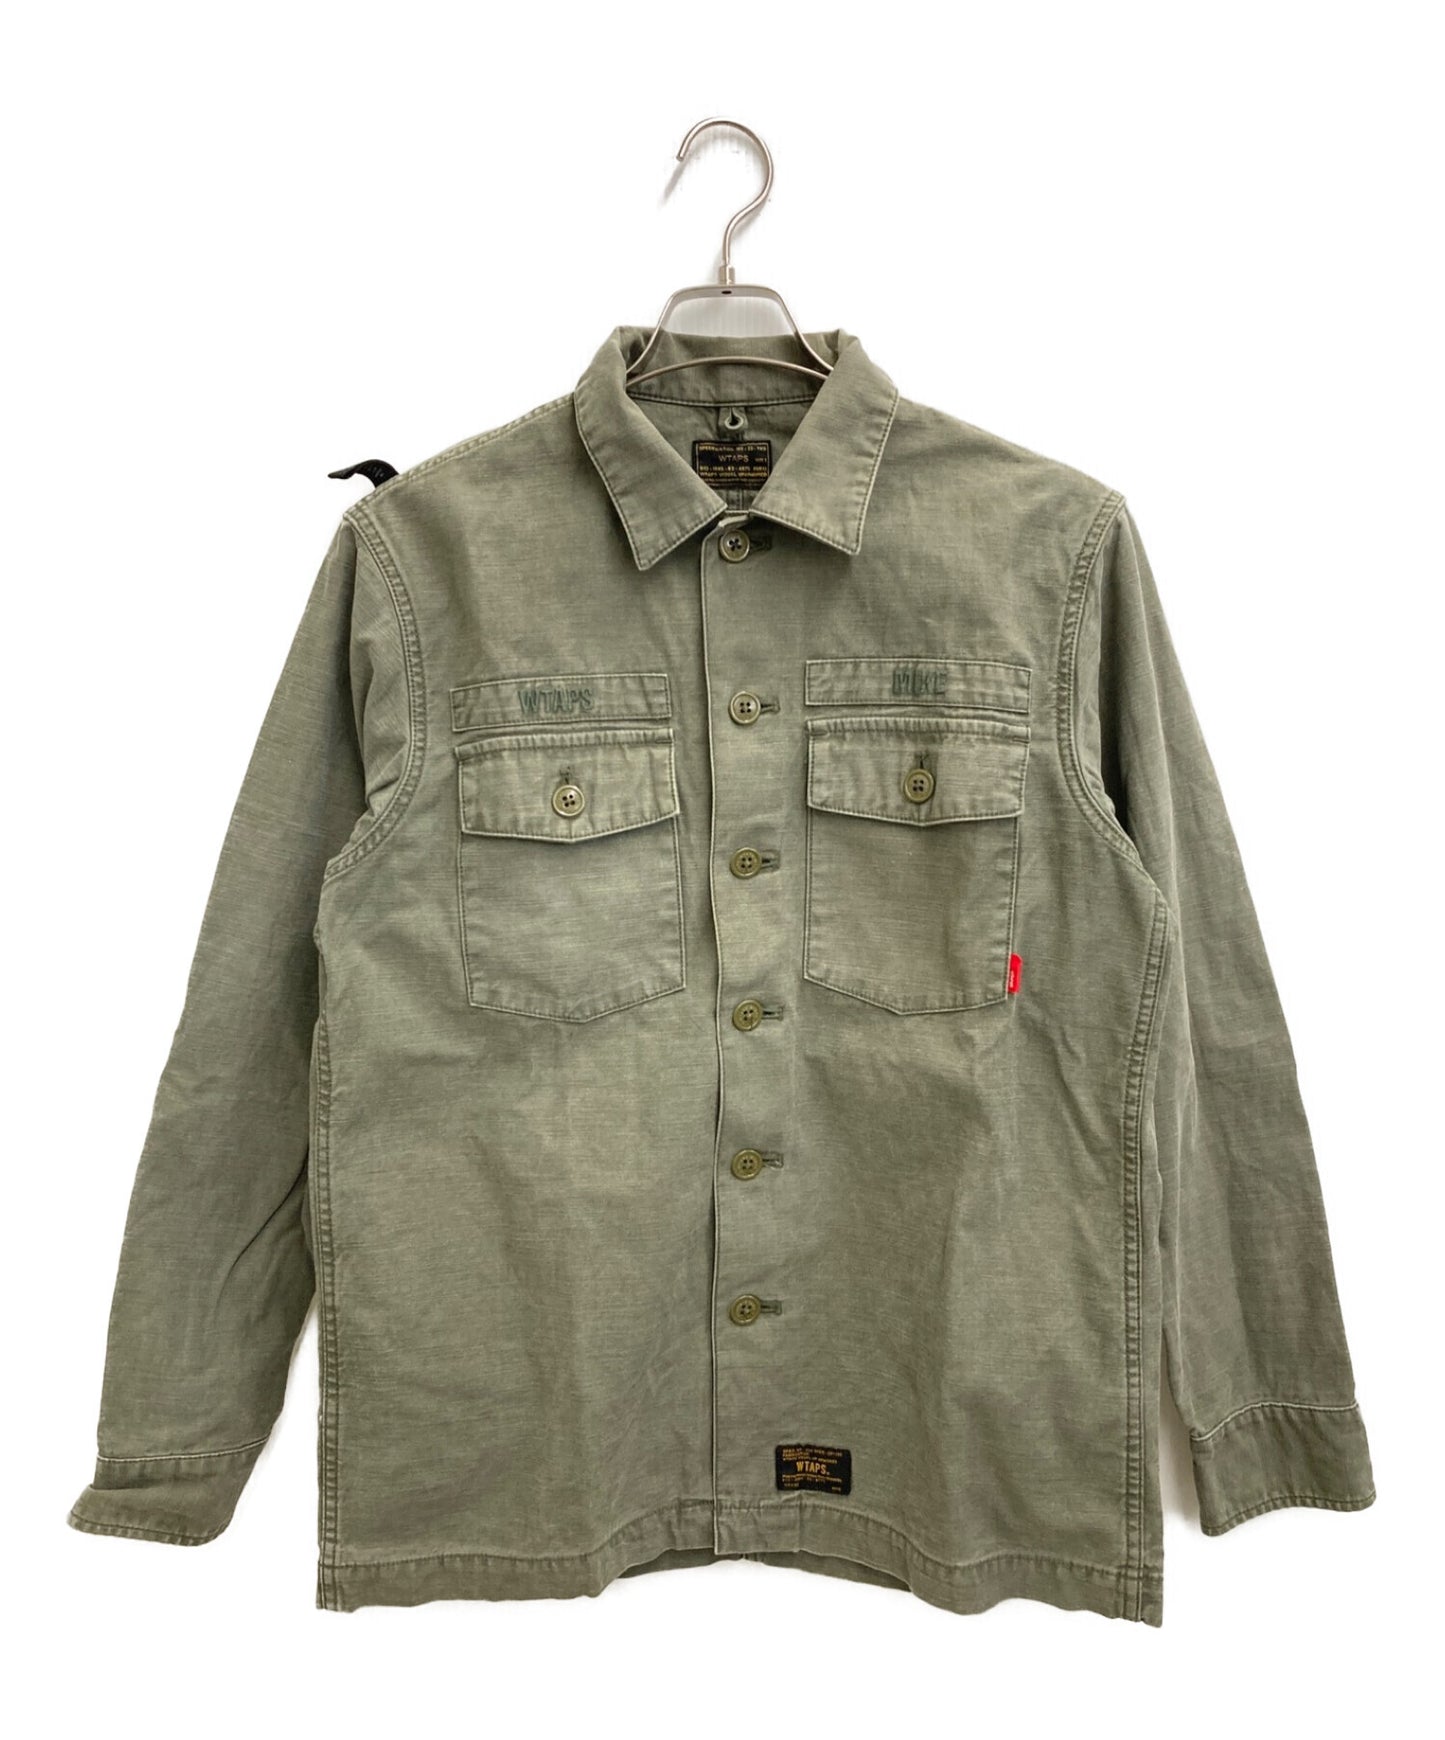 WTAPS Jacket / Military Jacket / Outerwear / Coverall 151GWDT-SHM02